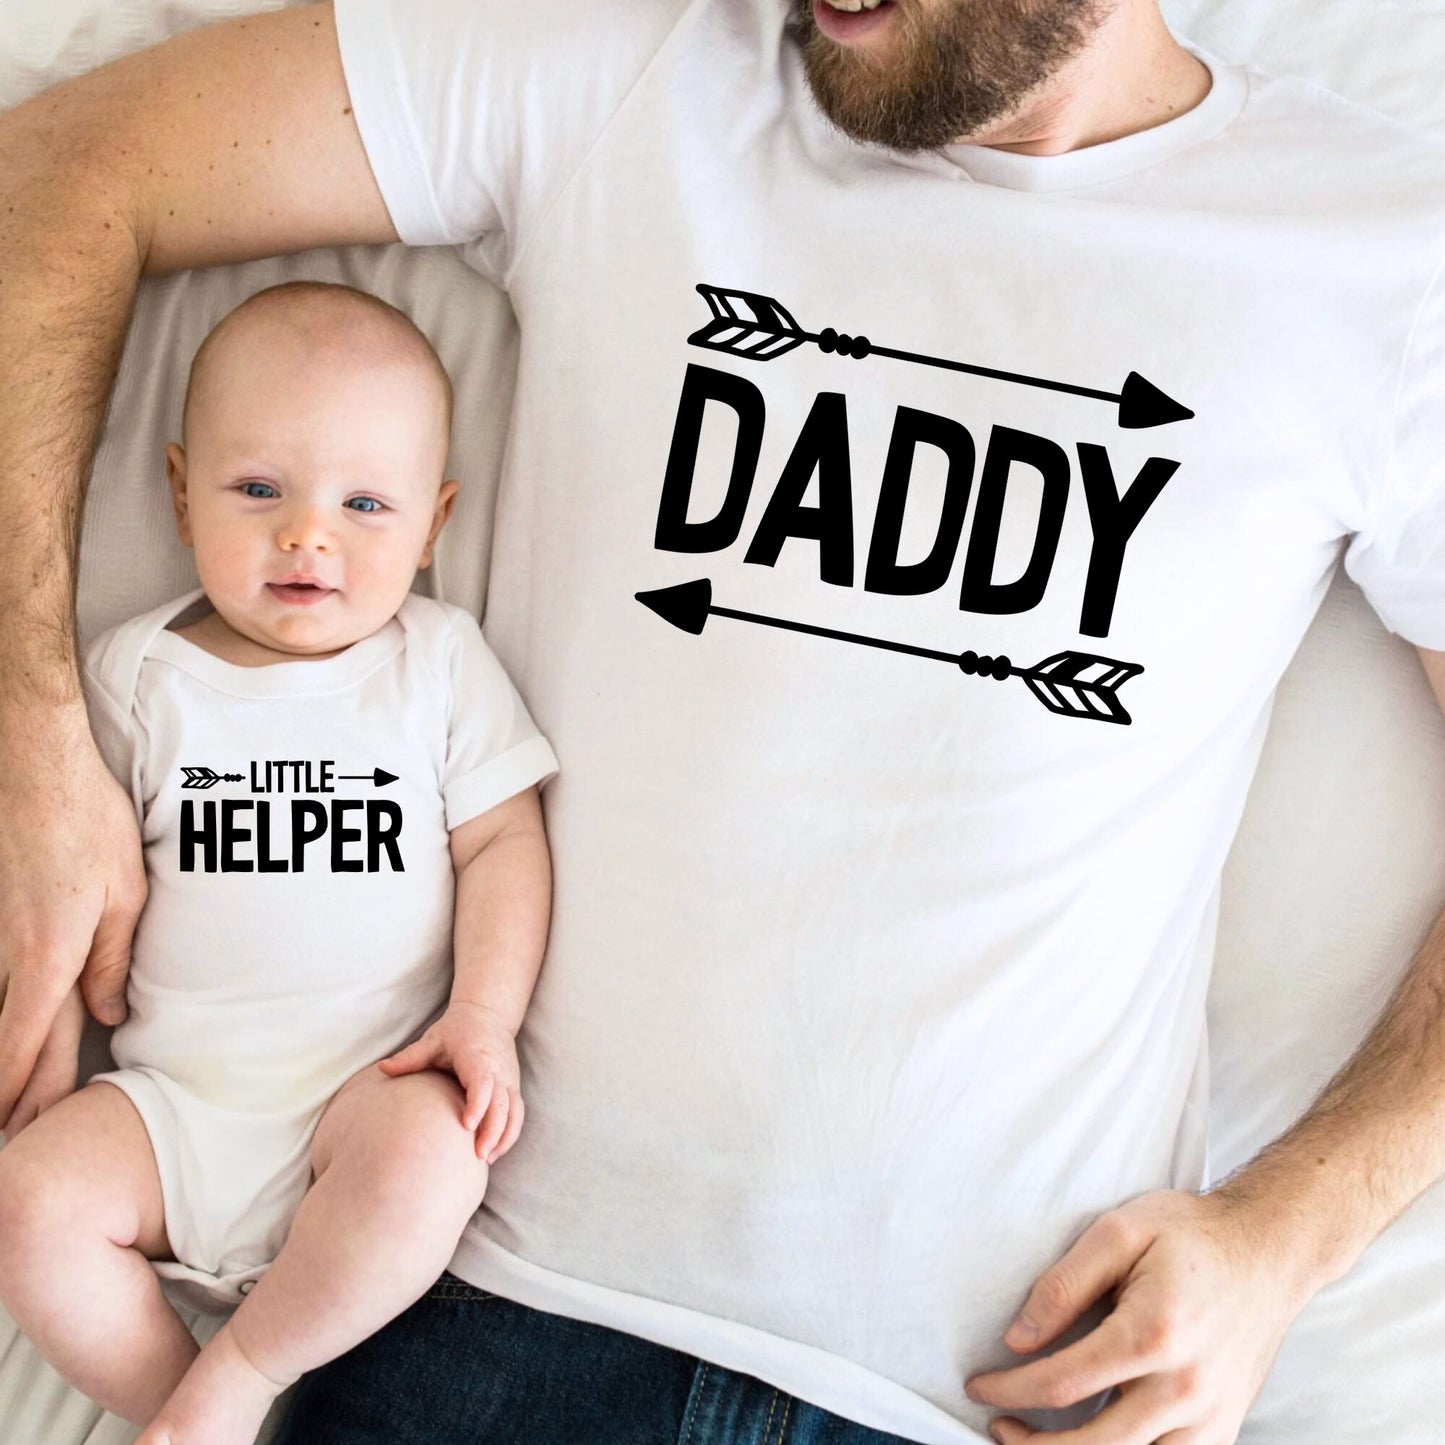 Daddy & Little Helper - Dad & Baby Matching Outfits